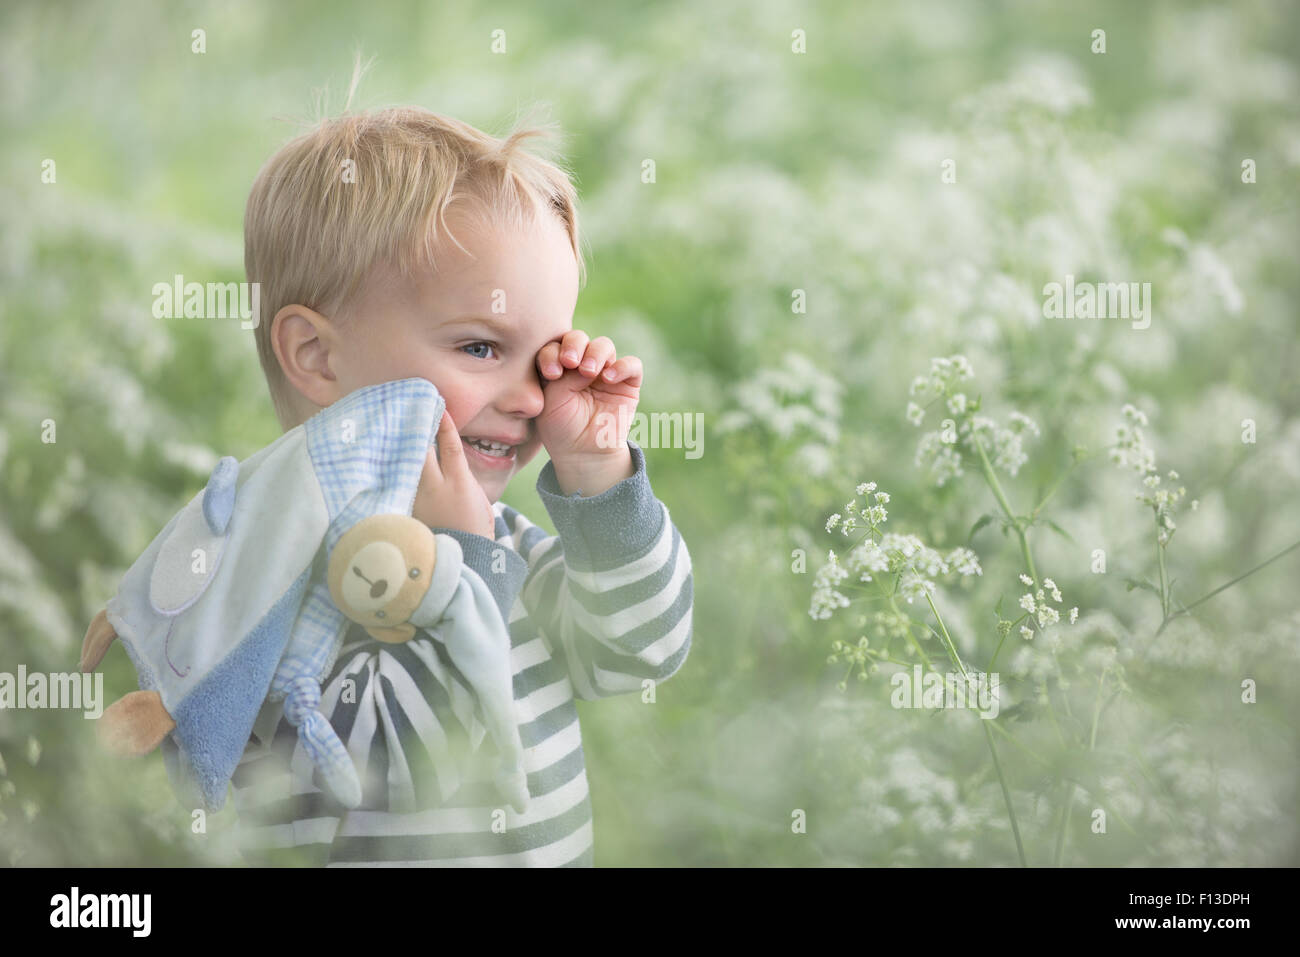 Tired toddler standing in a field rubbing his eyes Stock Photo